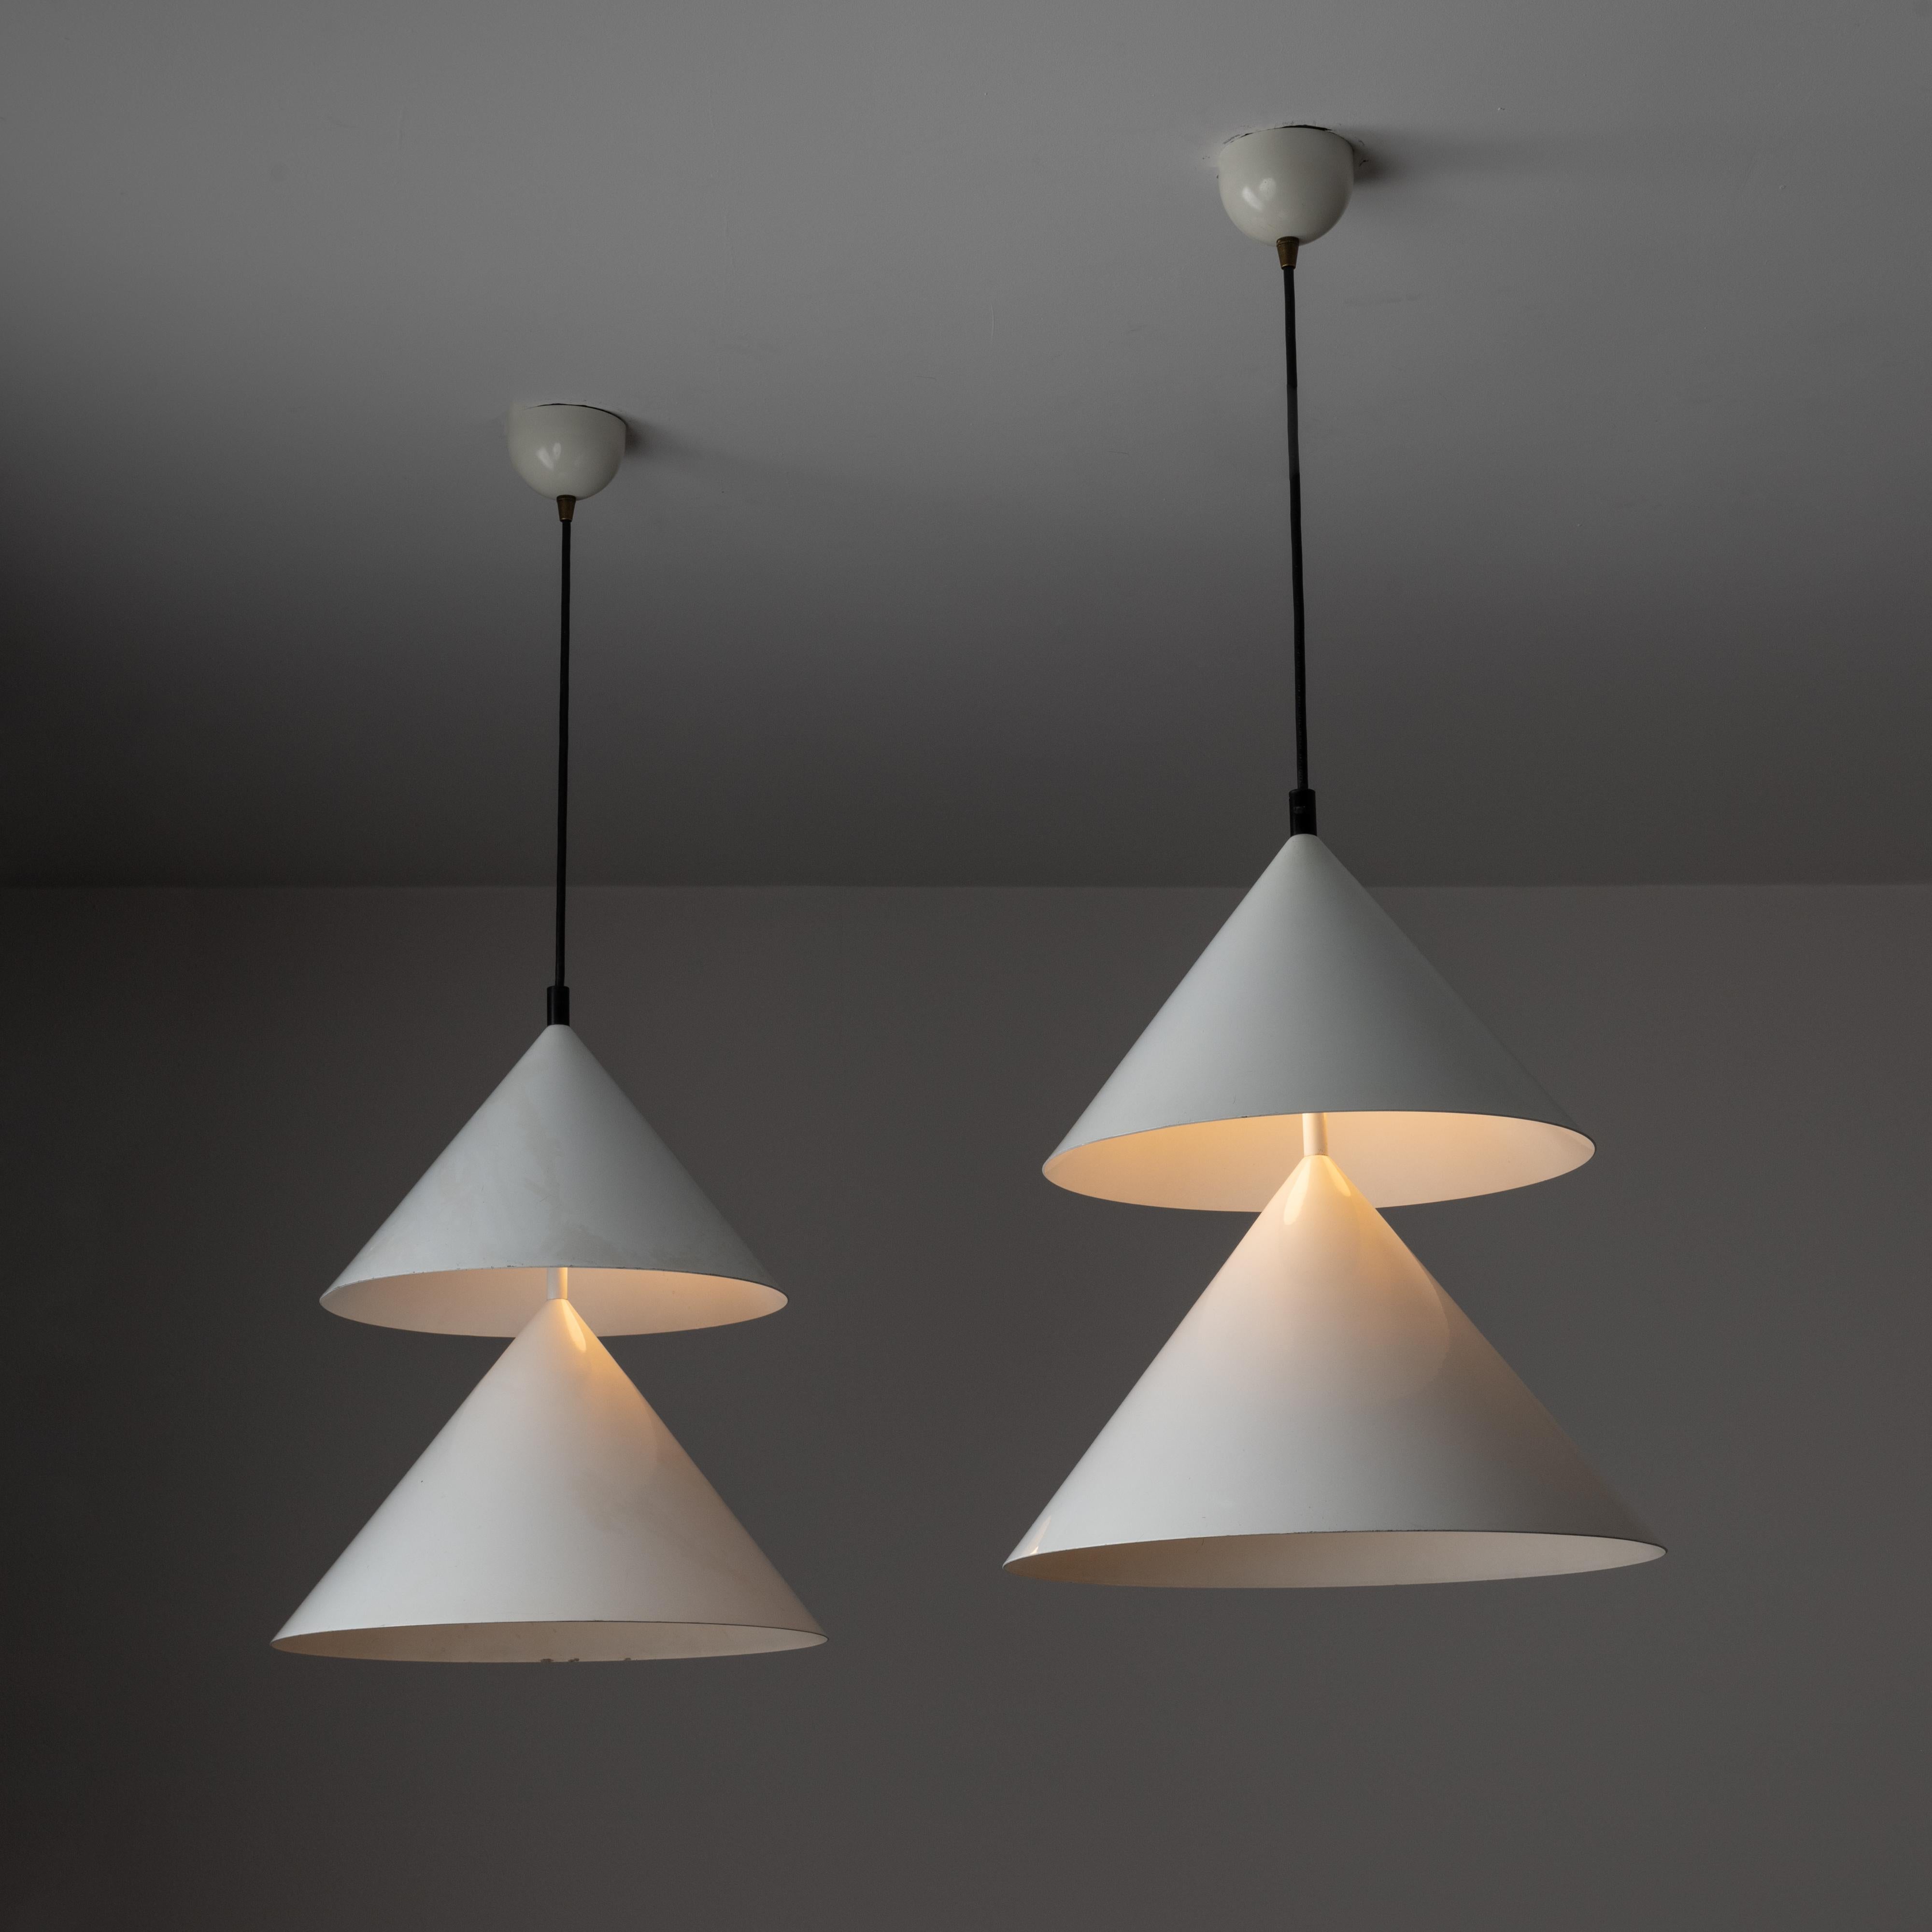 A pair of model 430 'Pascal' pendants by Vico Magistretti for Oluce. Designed and manufactured in Italy, in 1979. Minimalistic double-coned pendants show the turn of the decade from mid-century to post-modern design. The entire construction and